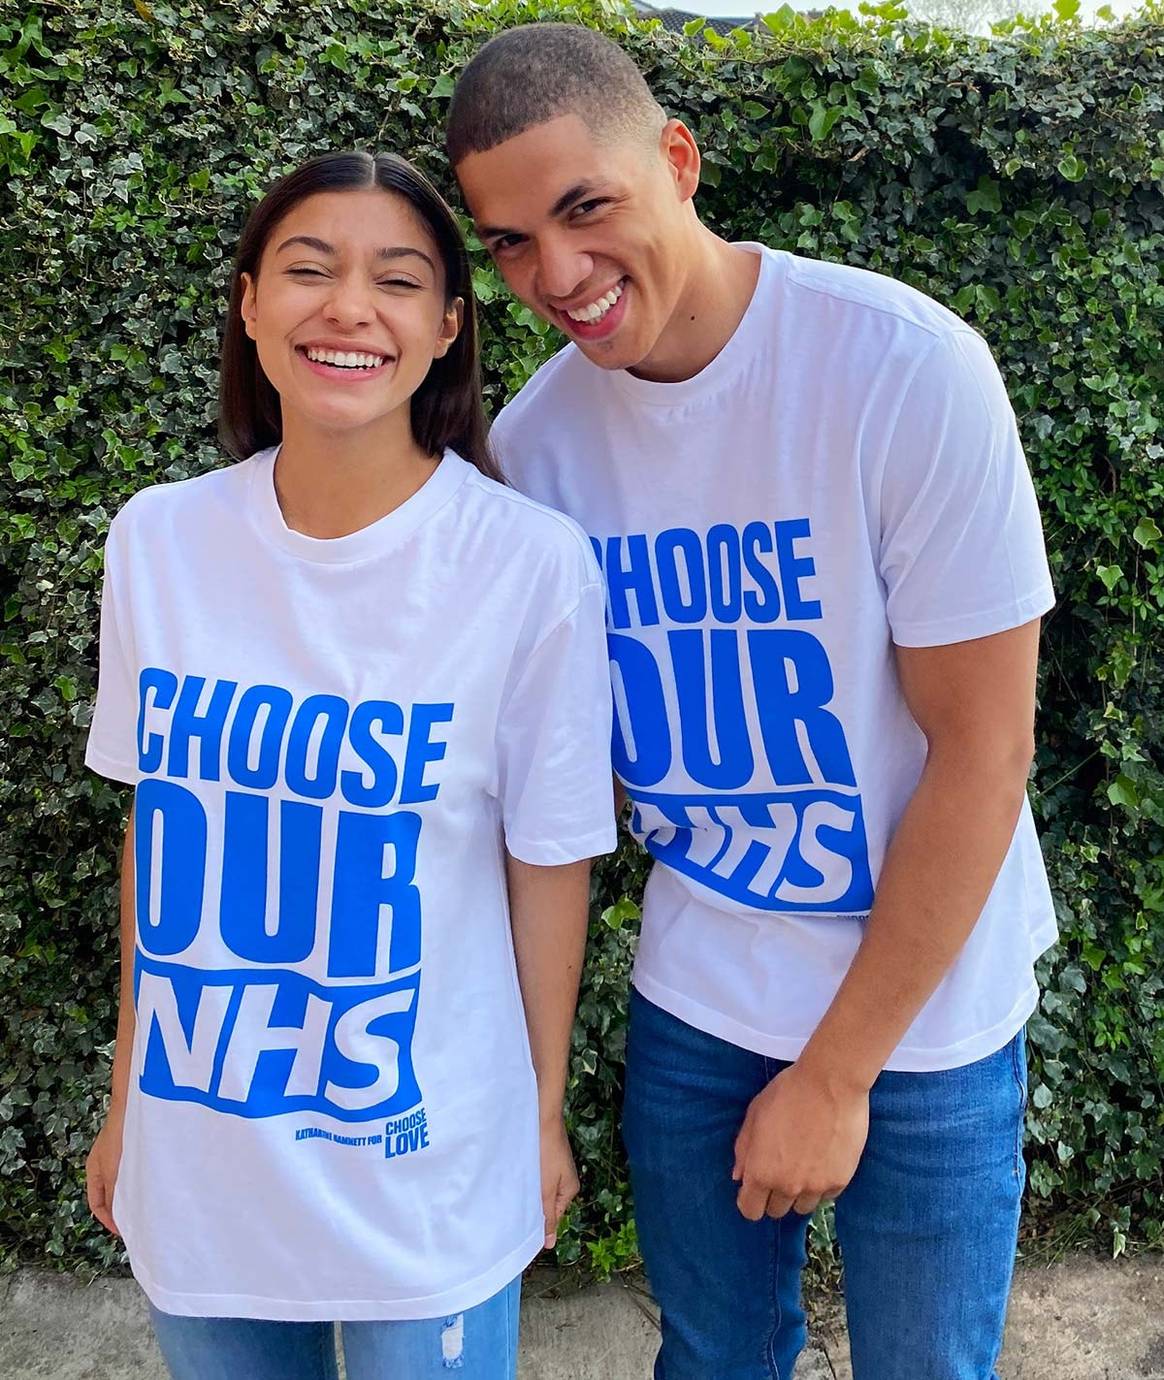 Brands launch charity T-shirts to support NHS